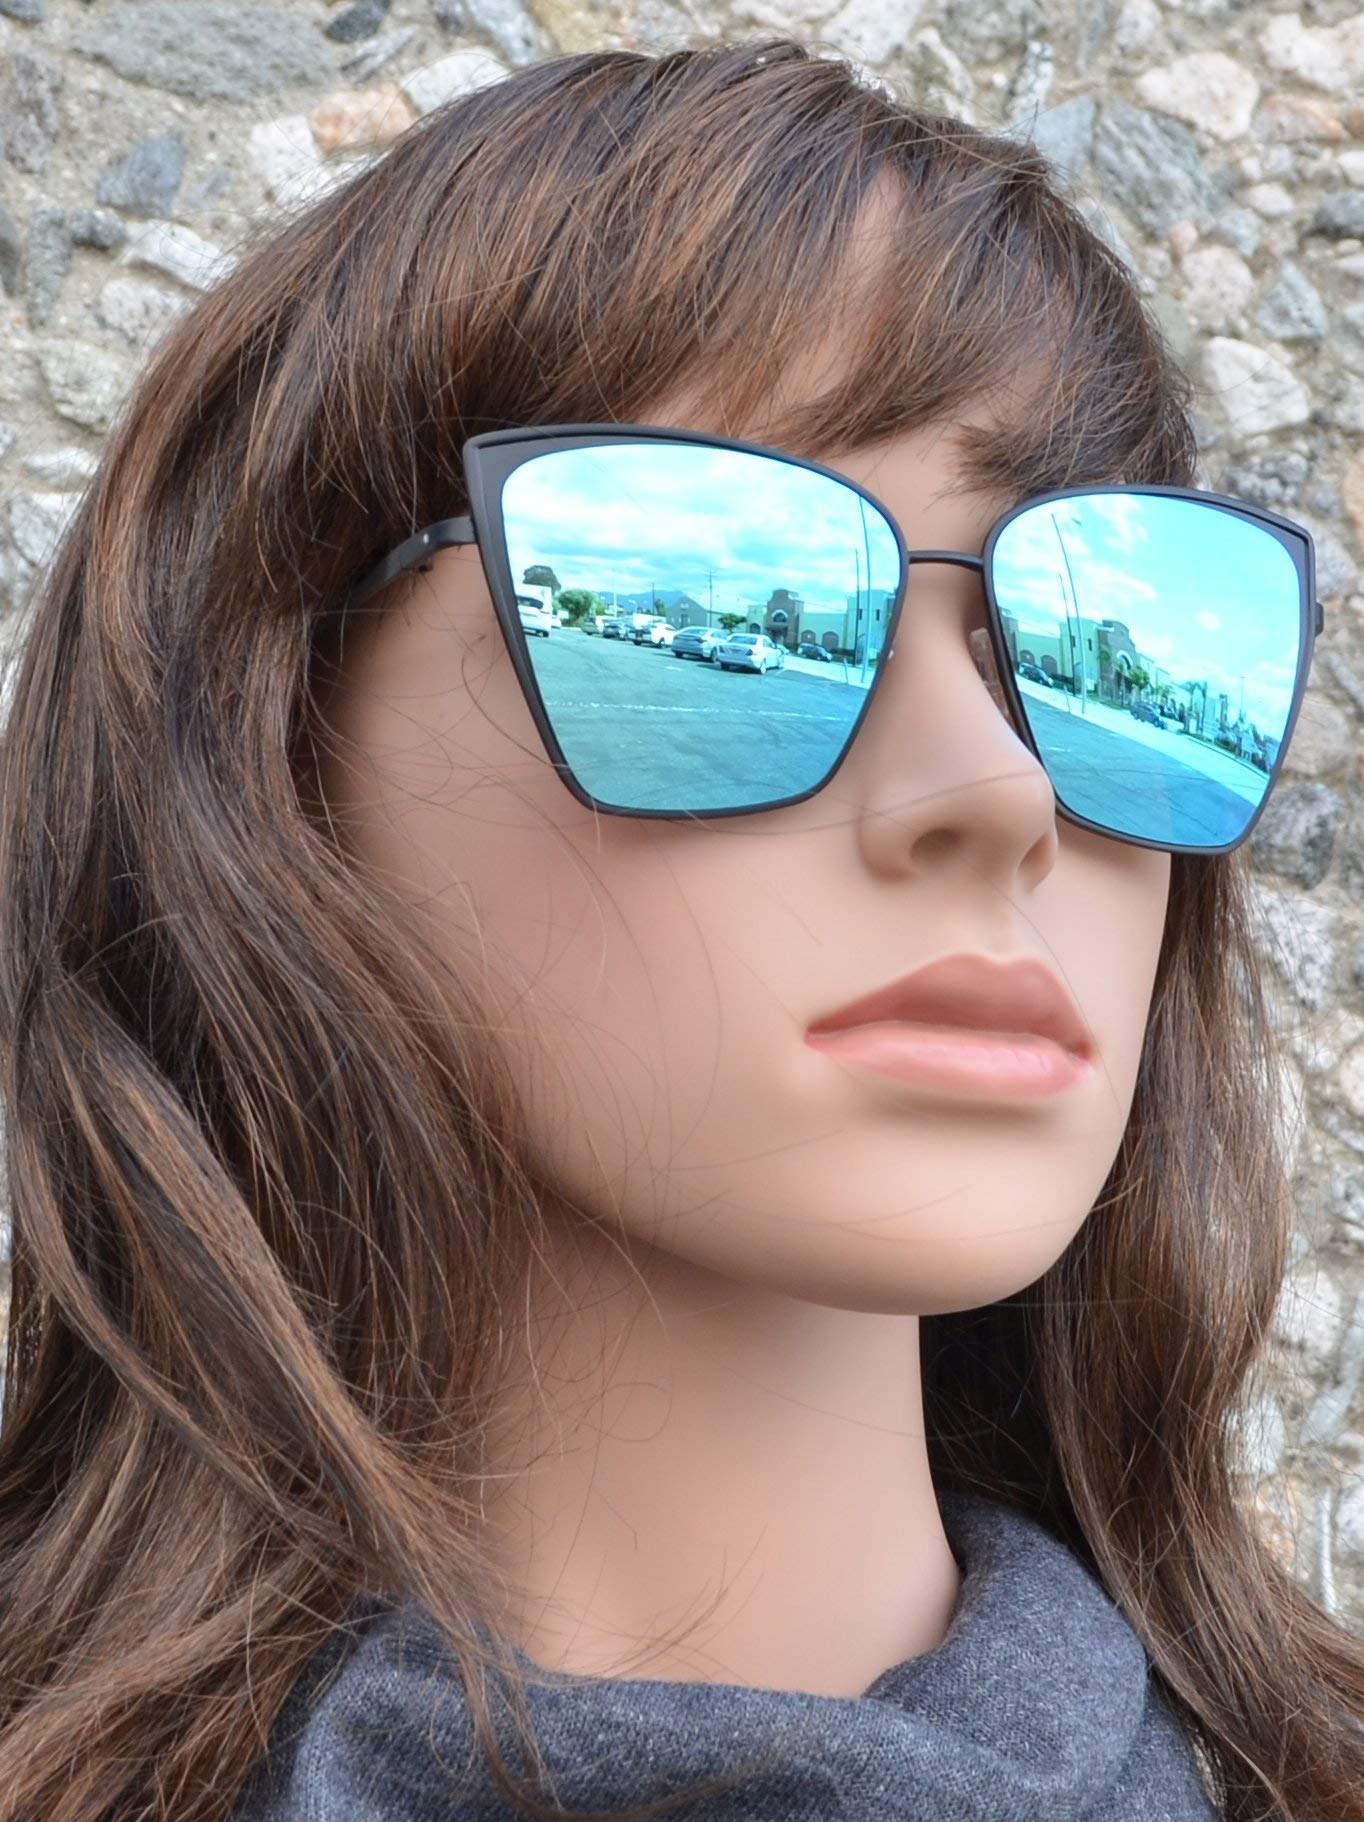 FC 6365 Blue RVC - Square Cat Eye Sunglasses with Blue Mirror Lens